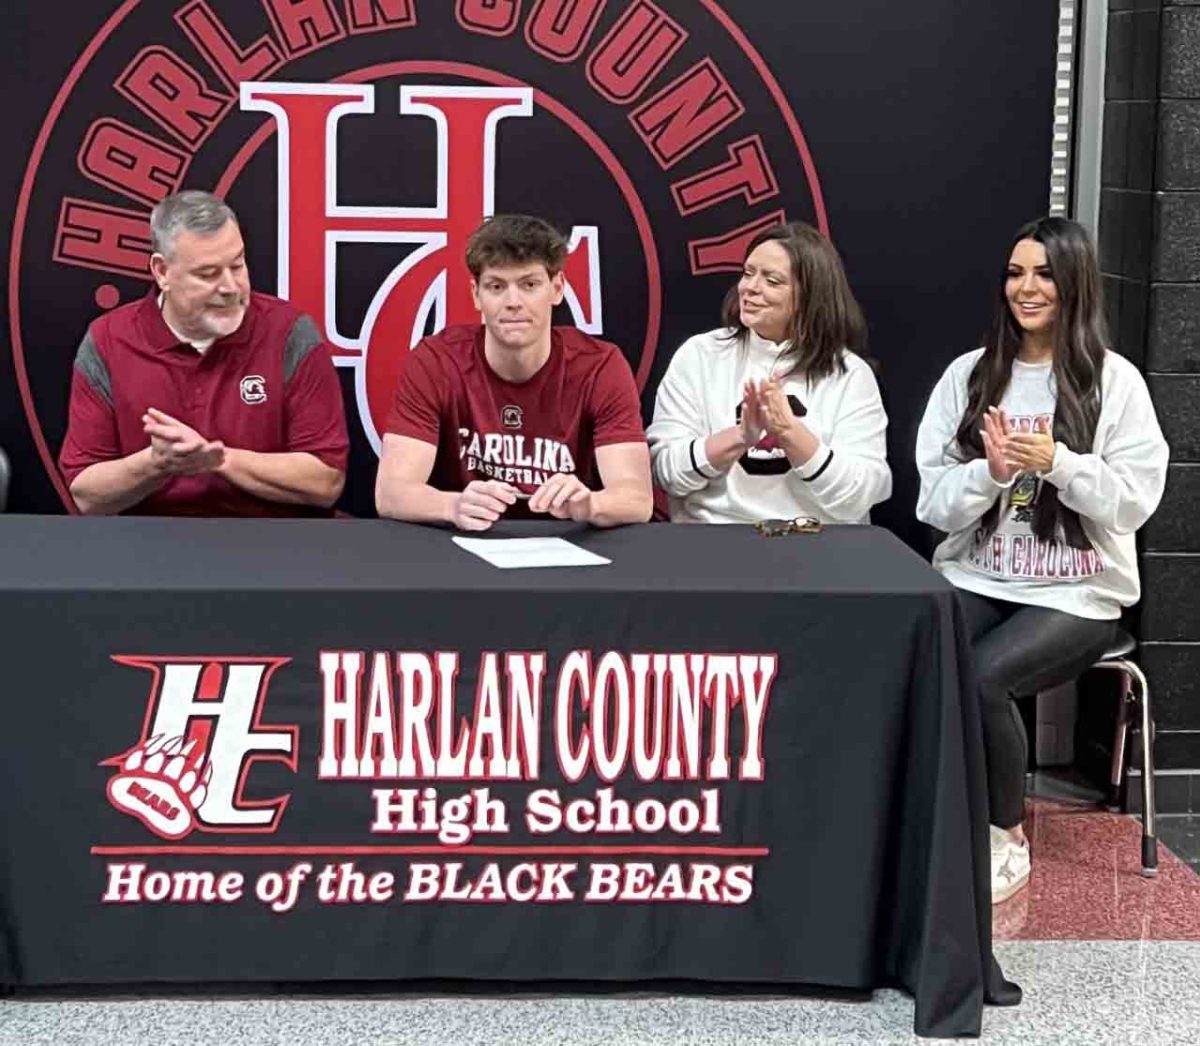 Harlan County High School senior guard Trent Noah signed with the University of South Carolina on Friday at HCHS. Pictured with Noah are his father, Trent; mother, Stacy; and sister, Emersyn.